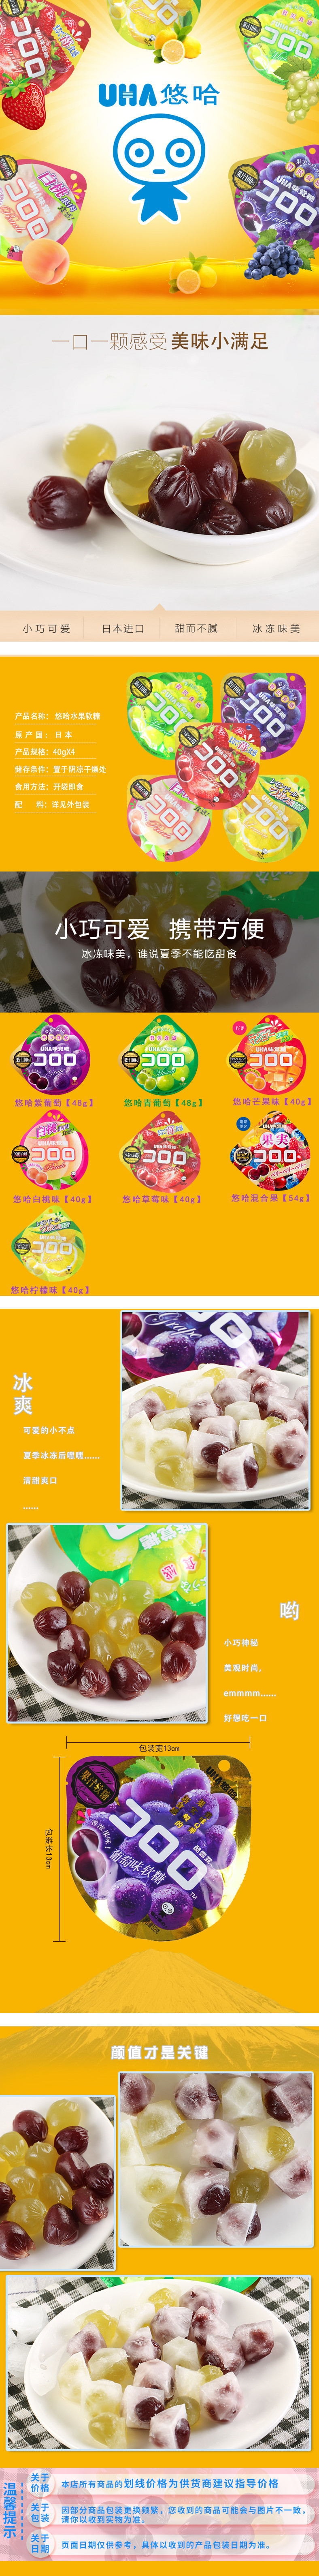 Fruit Candy Strawberry Flavor Winter Limited 40g